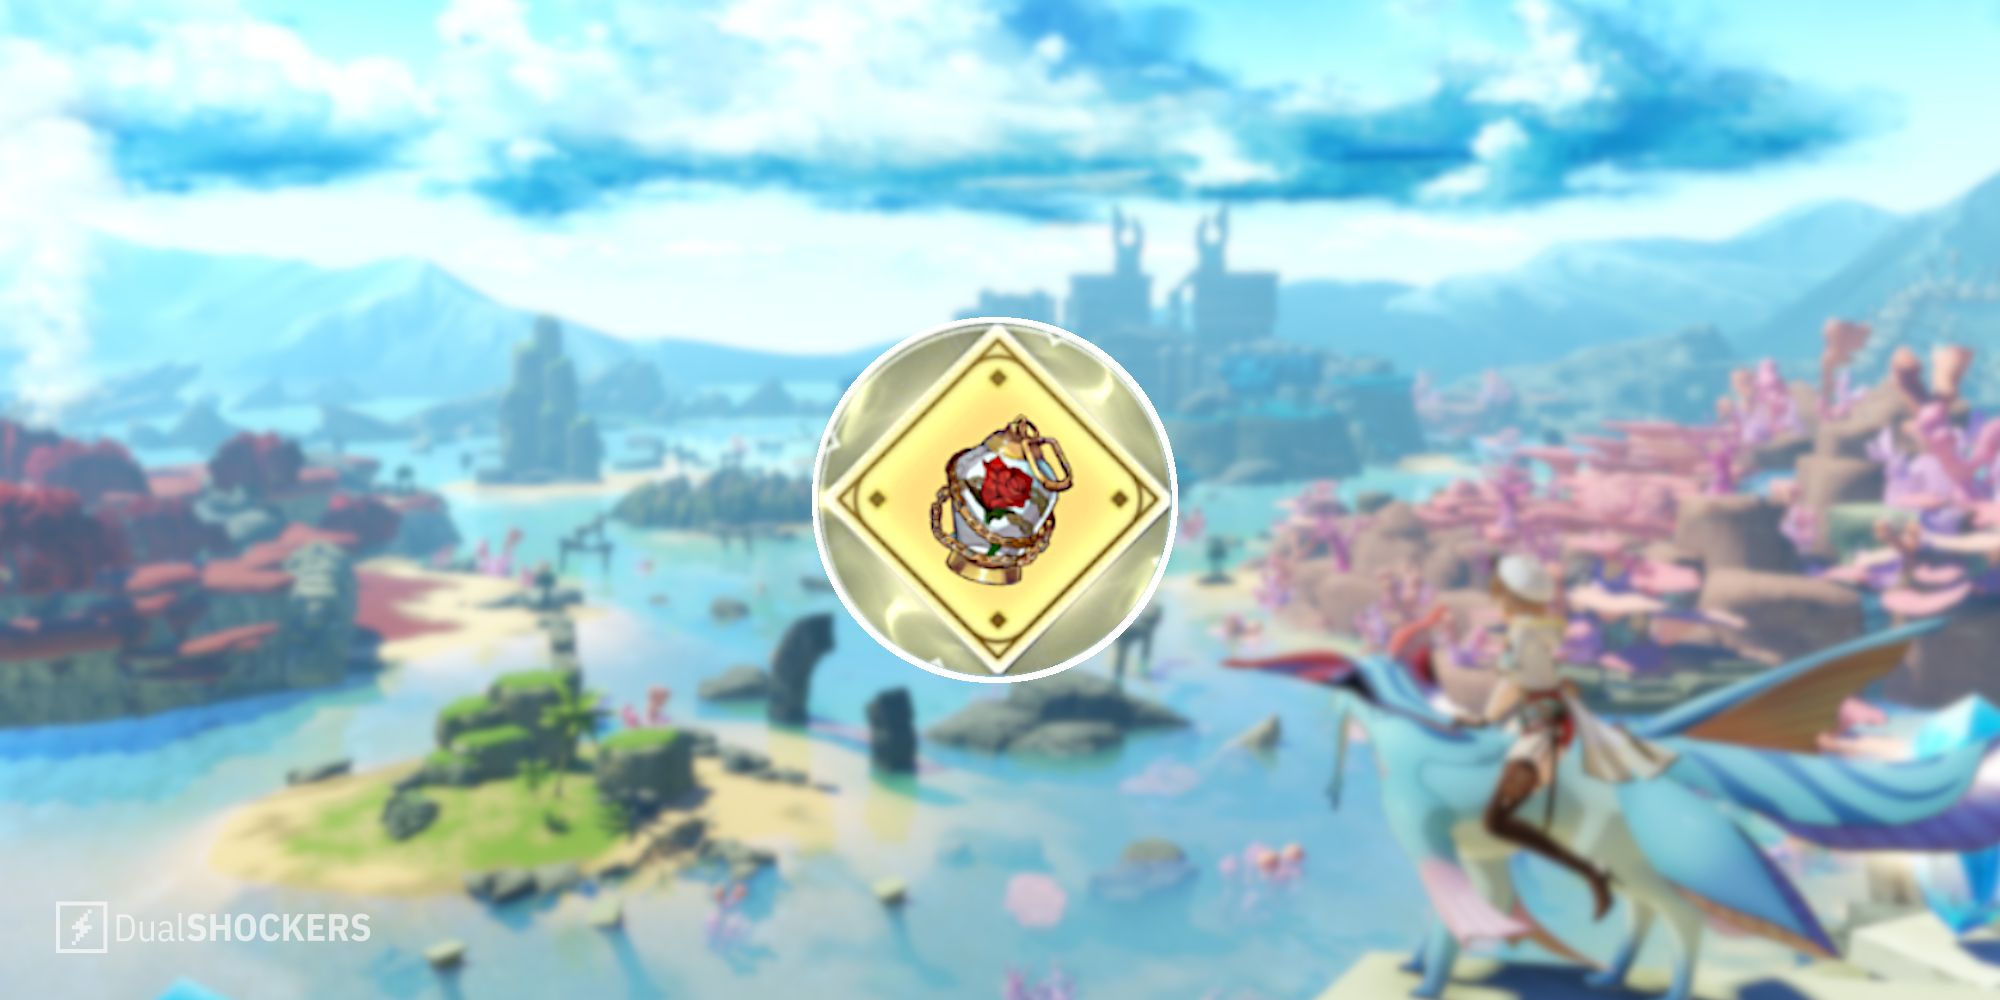 Split image of the environment in the background of Atelier Ryza 3 and an image of the Astro Rose in the foreground from Atelier Ryza 3.